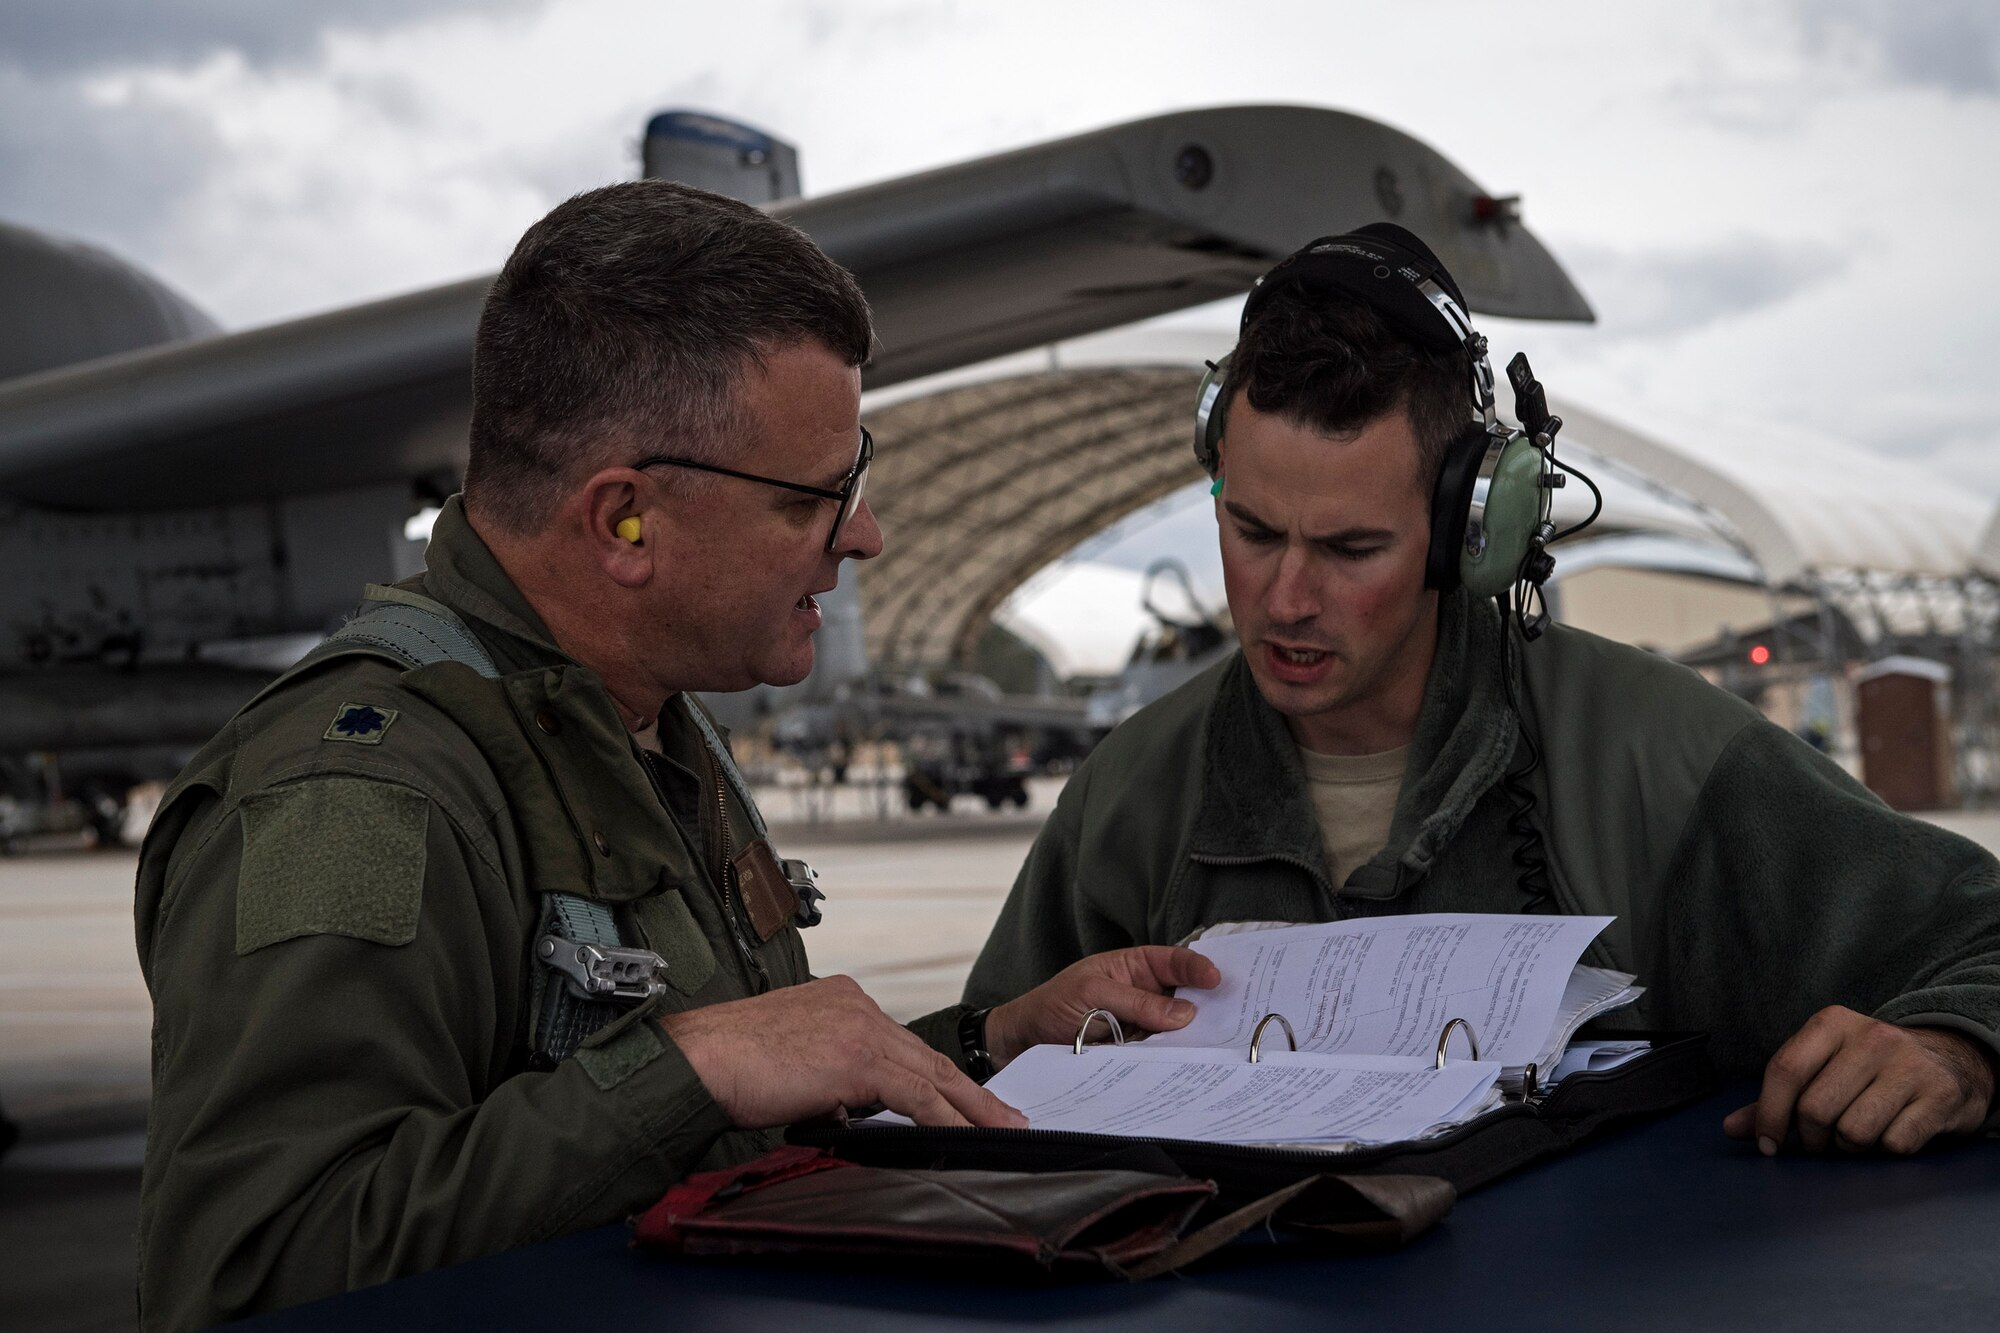 U.S. Air Force Reserve Lt. Col Robert Sweet, 476th Fighter Group A-10C Thunderbolt II pilot and Staff Sgt. Christopher Fisher, 74th Aircraft Maintenance Unit crew chief, check paperwork before a flight during a surge exercise, Nov. 9, 2016, at Moody Air Force Base, Ga. Moody's 476th and 23d Fighter Groups, 23d Maintenance Group and geographically seperated units from the 93d Air Ground Operations Wing integrated during the exercise, performing non-stop operations that tested the A-10's maintenance and aviation capabilities to enhance mission readiness. (U.S. Air Force photo by Airman 1st Class Janiqua P. Robinson) 